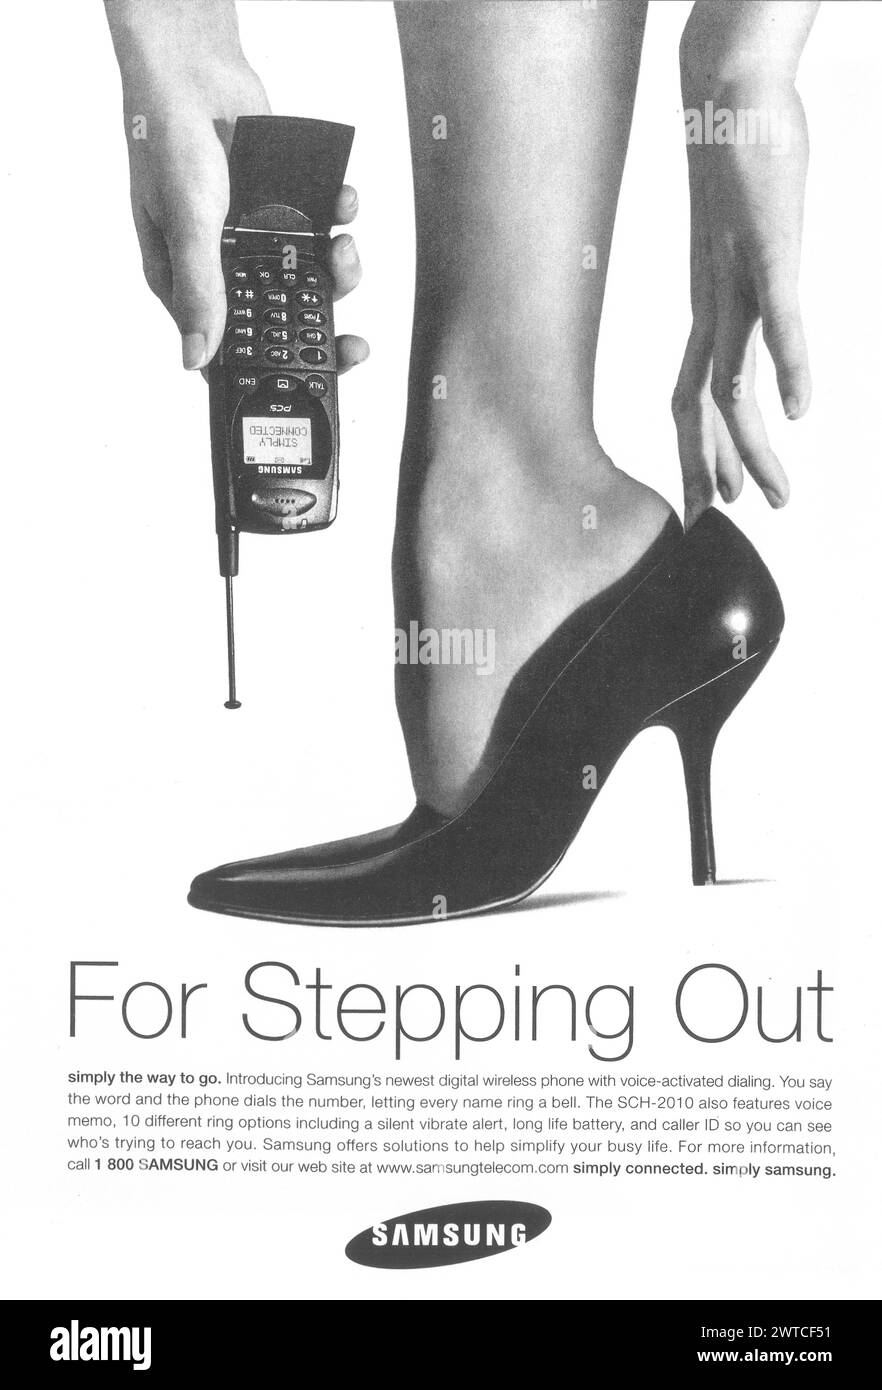 1998 Samsung SCH-2010 mobile phone ad. 'For stepping out.' Stock Photo